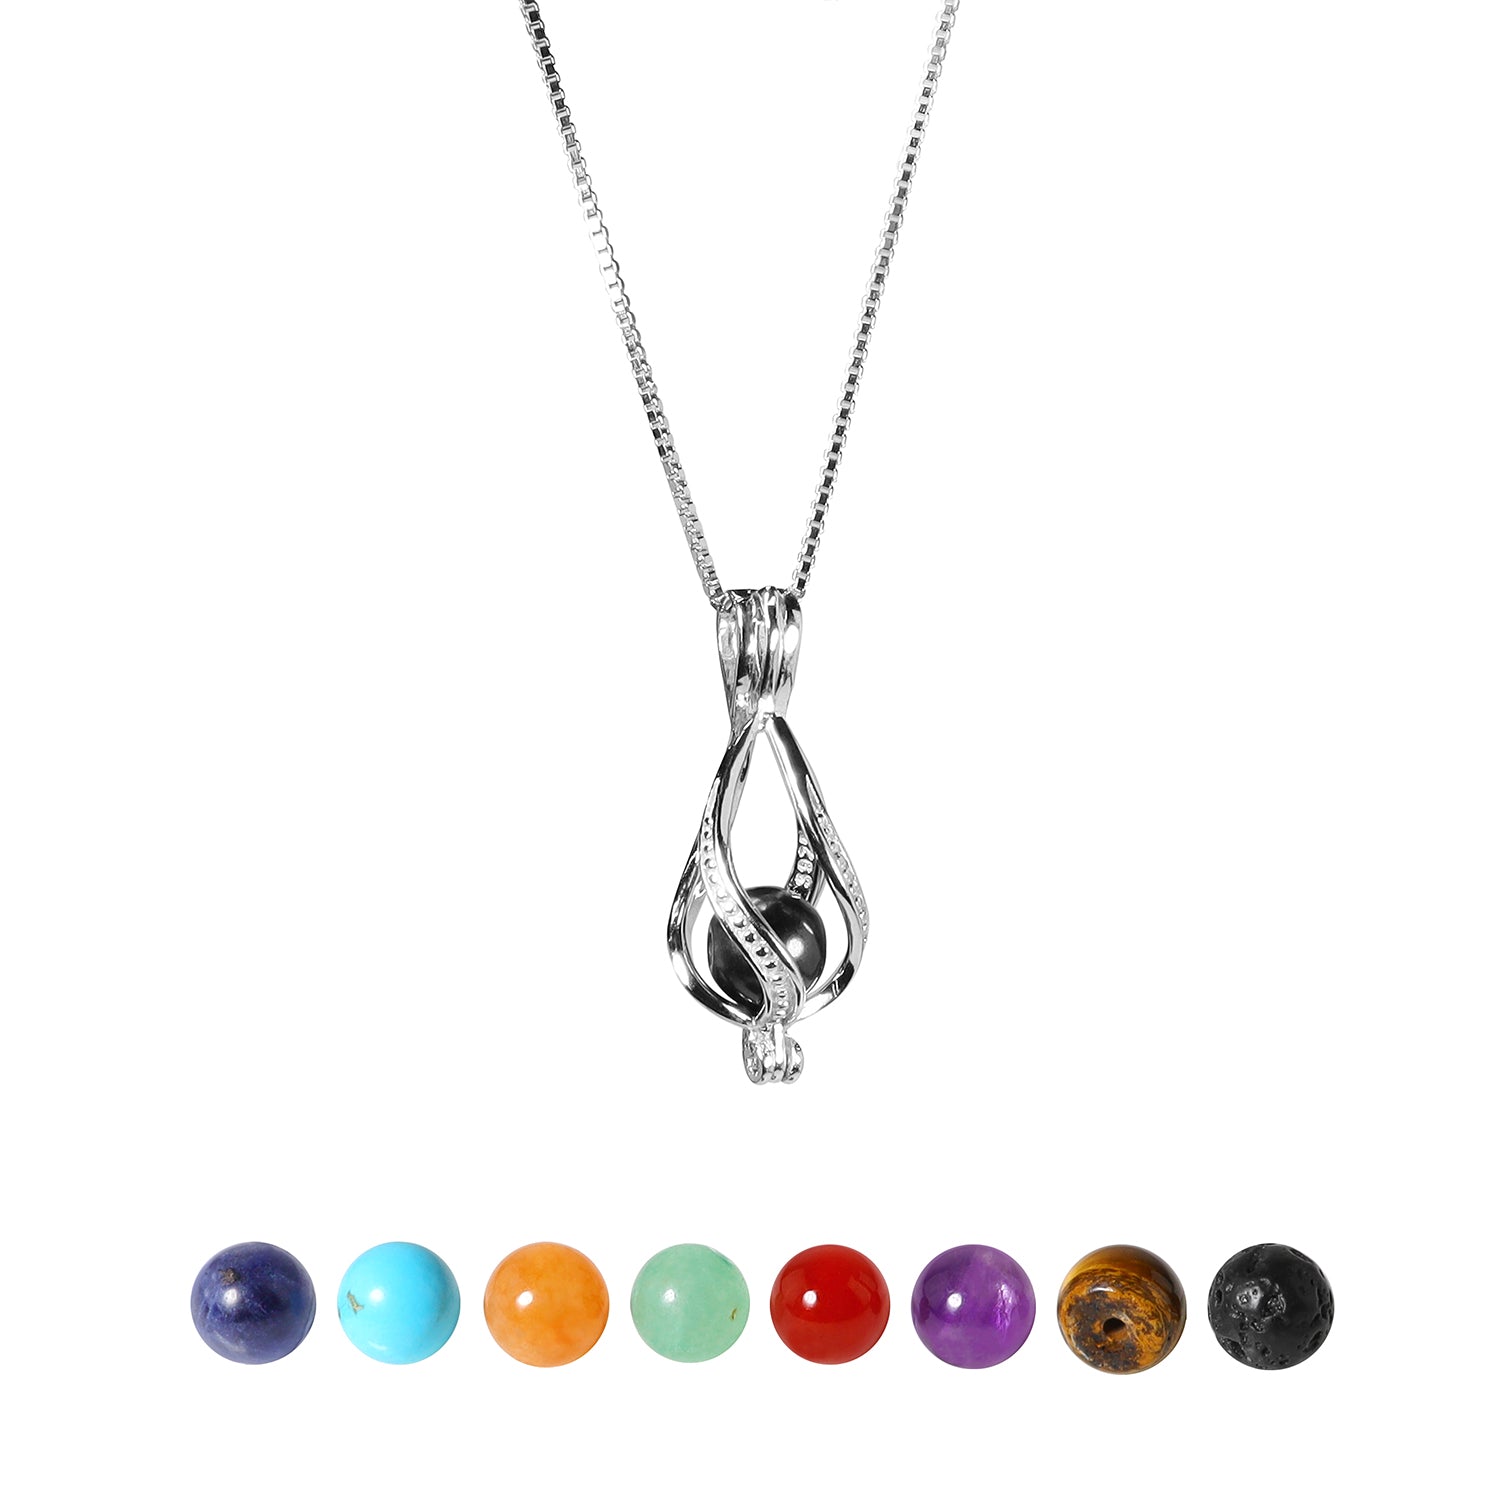 Sterling Silver Interchangeable Shungite Pendant and 18-Inch Necklace - Includes Shungite, Lava Stone for Aromatherapy and 7 Other Gemstones - Chakra